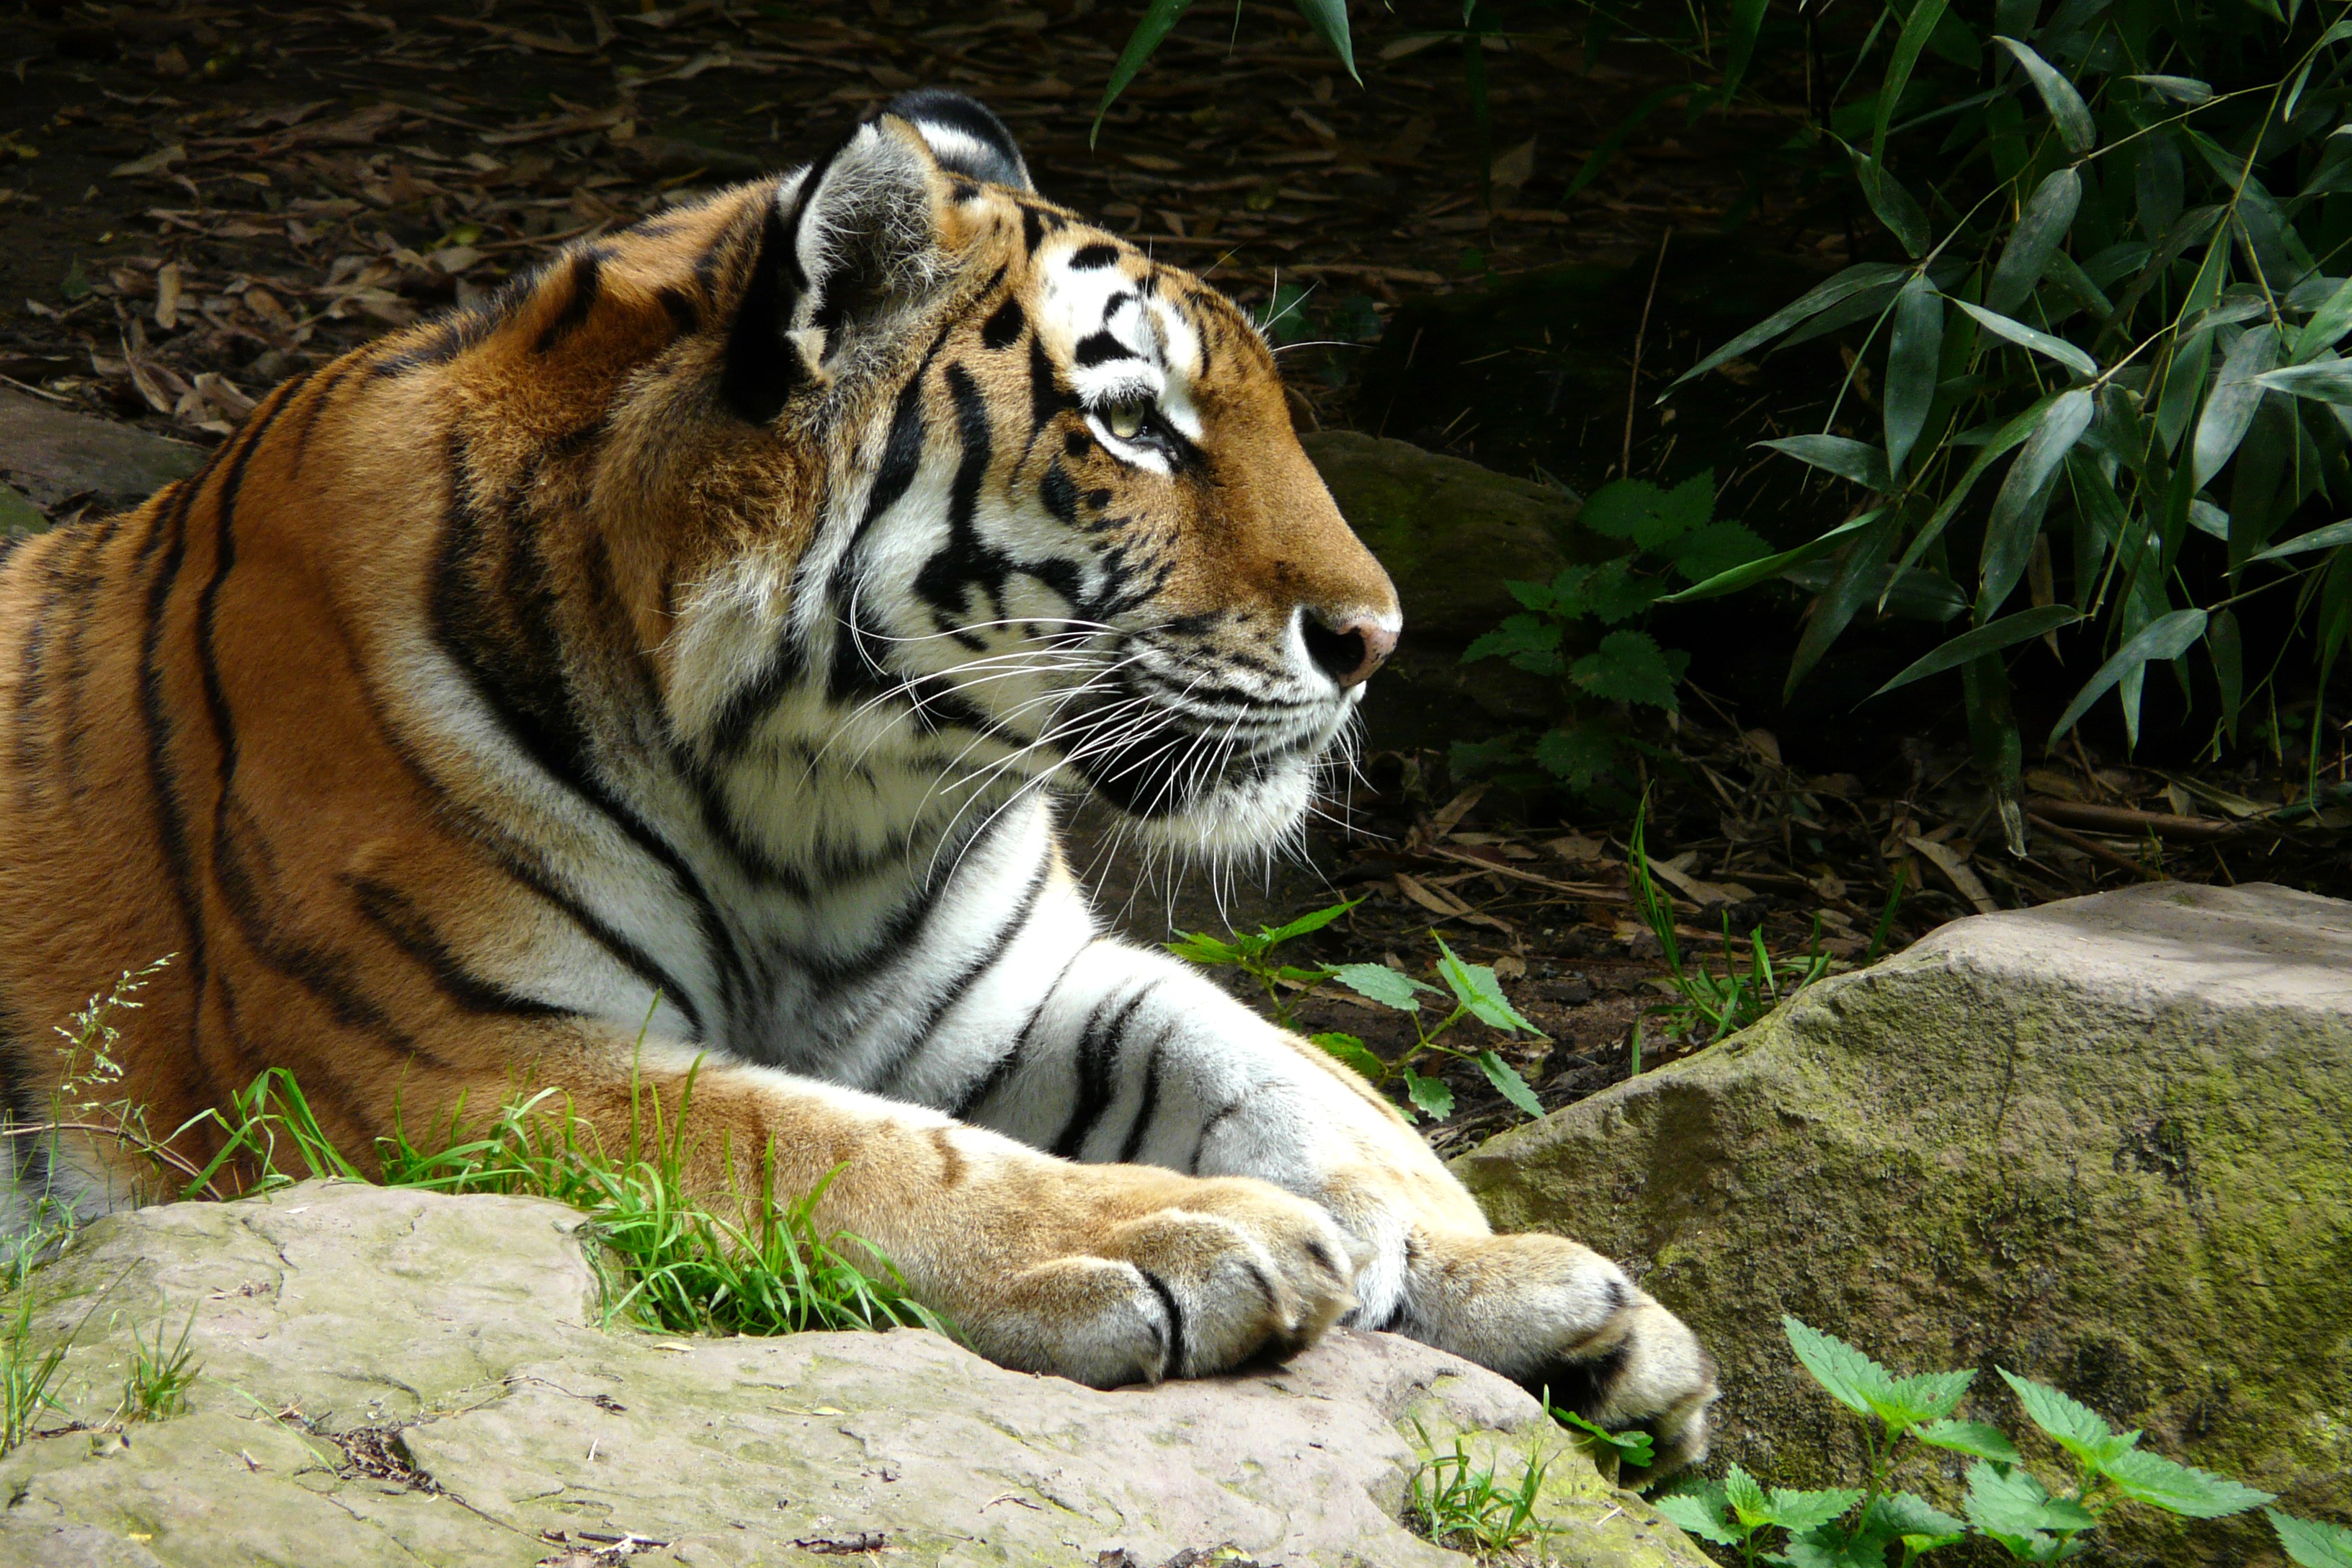 A tiger resting on the bank of a river